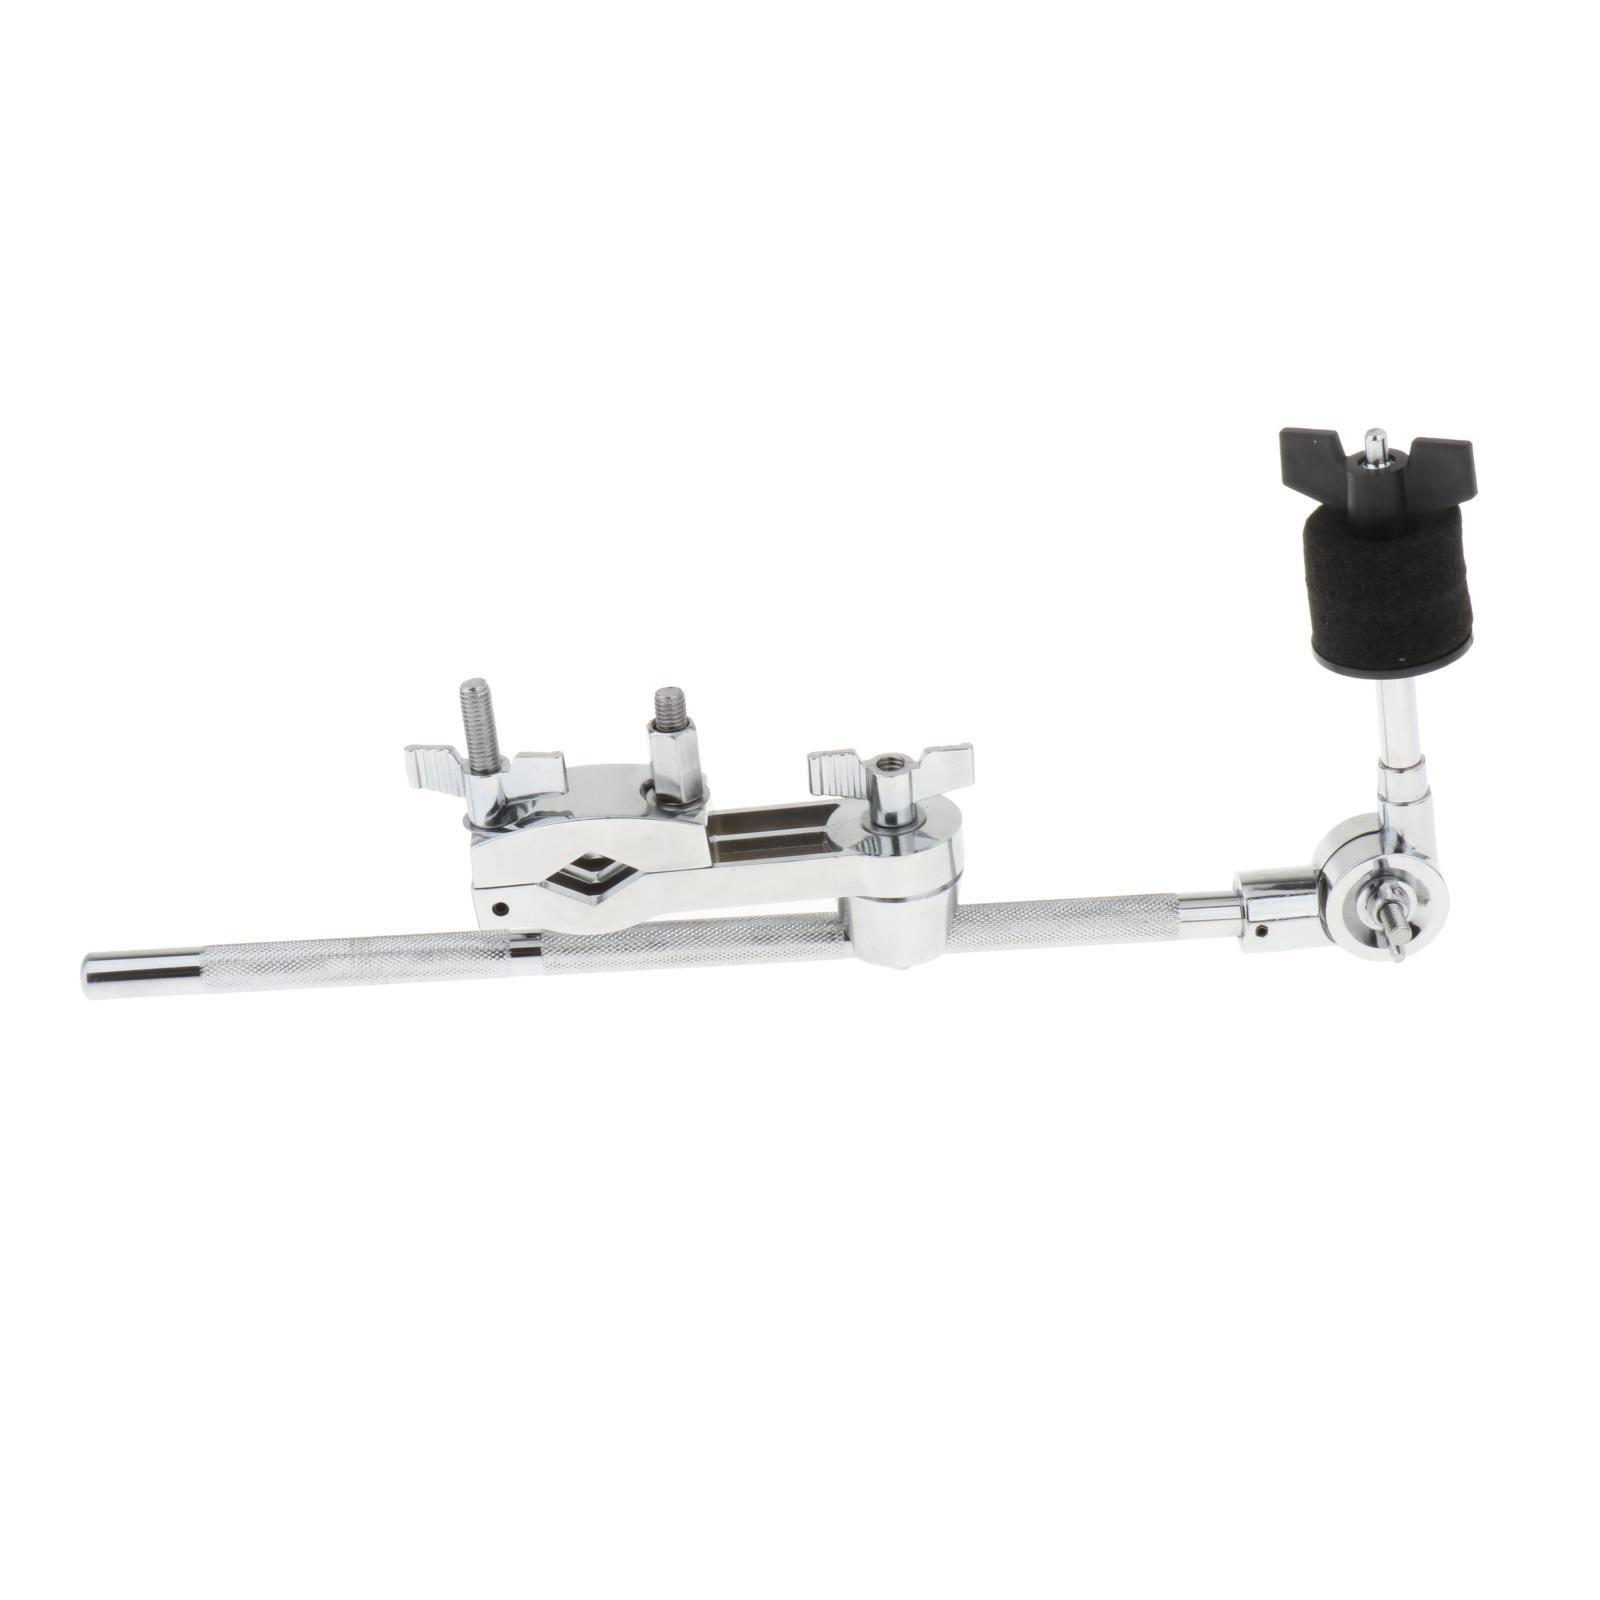 Pdp Cymbal Arm Grabber Cymbal Arm Drum Set Clamp Long Arm 33cm Percussion Instruments Parts Drum Stand Clamp Drum Cymbal Arm